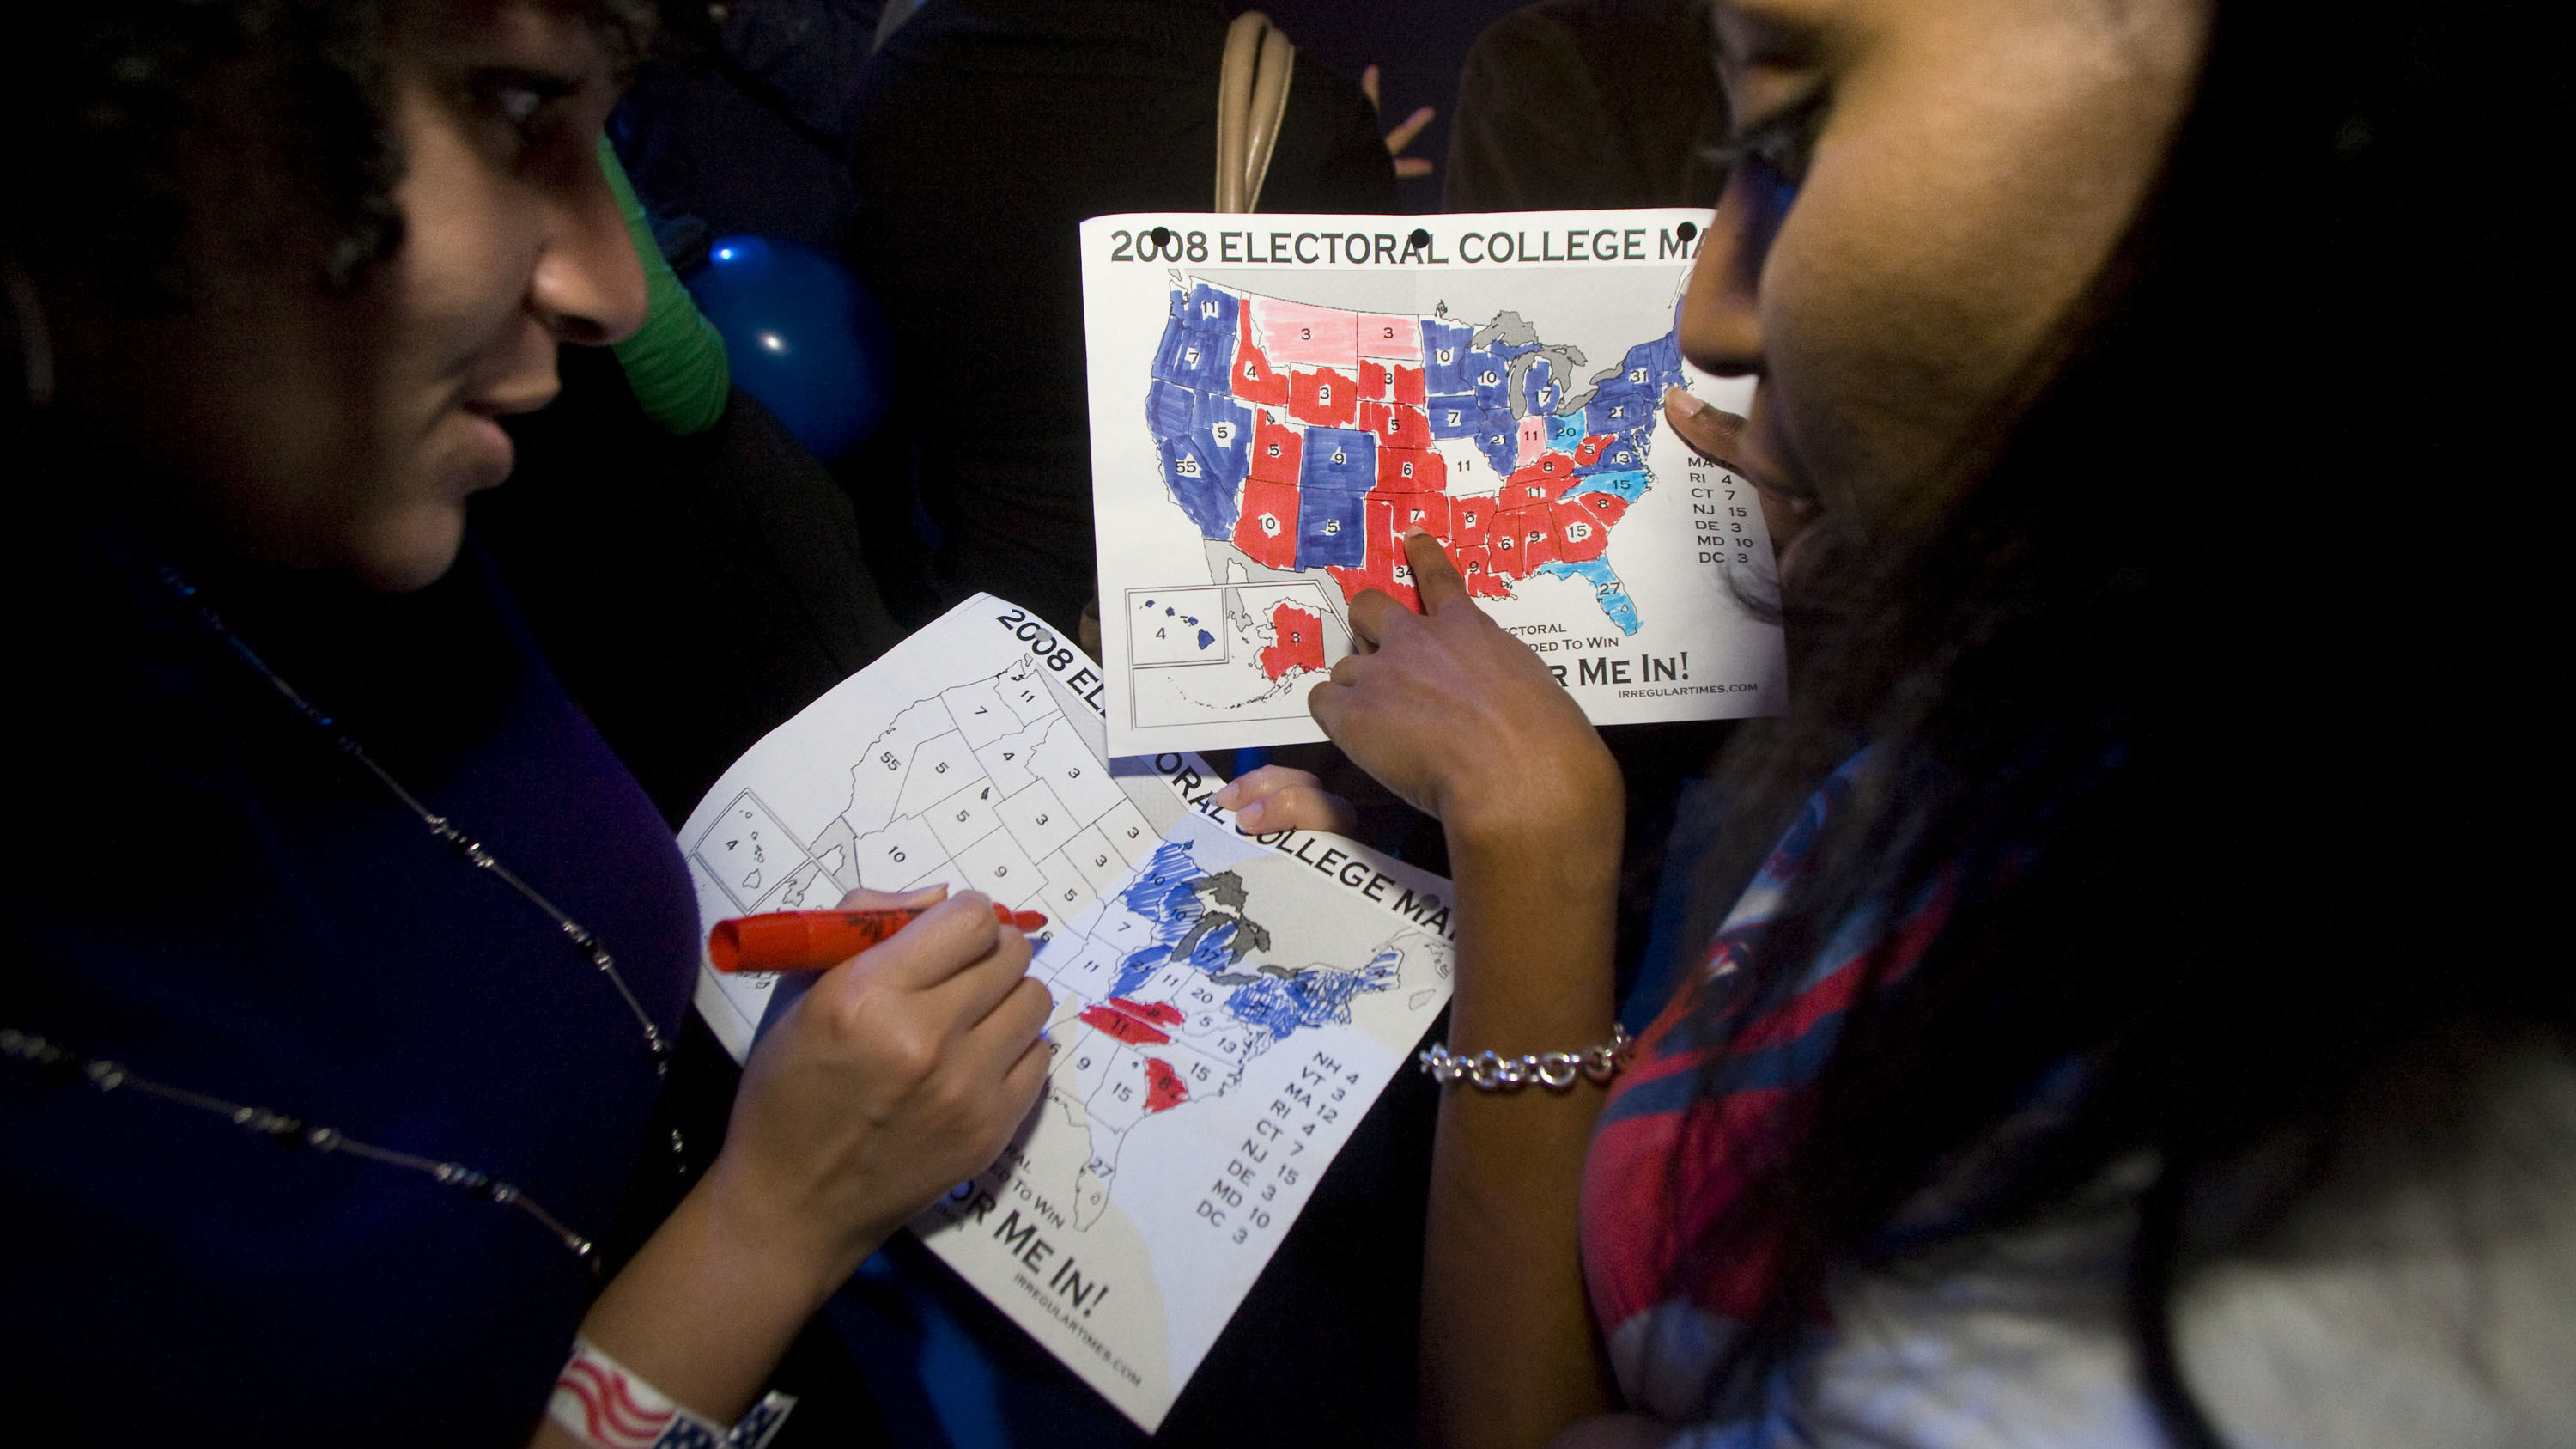 Rakeda Leaks (right) and Candice Williams fill out Electoral College maps on election night 2008.